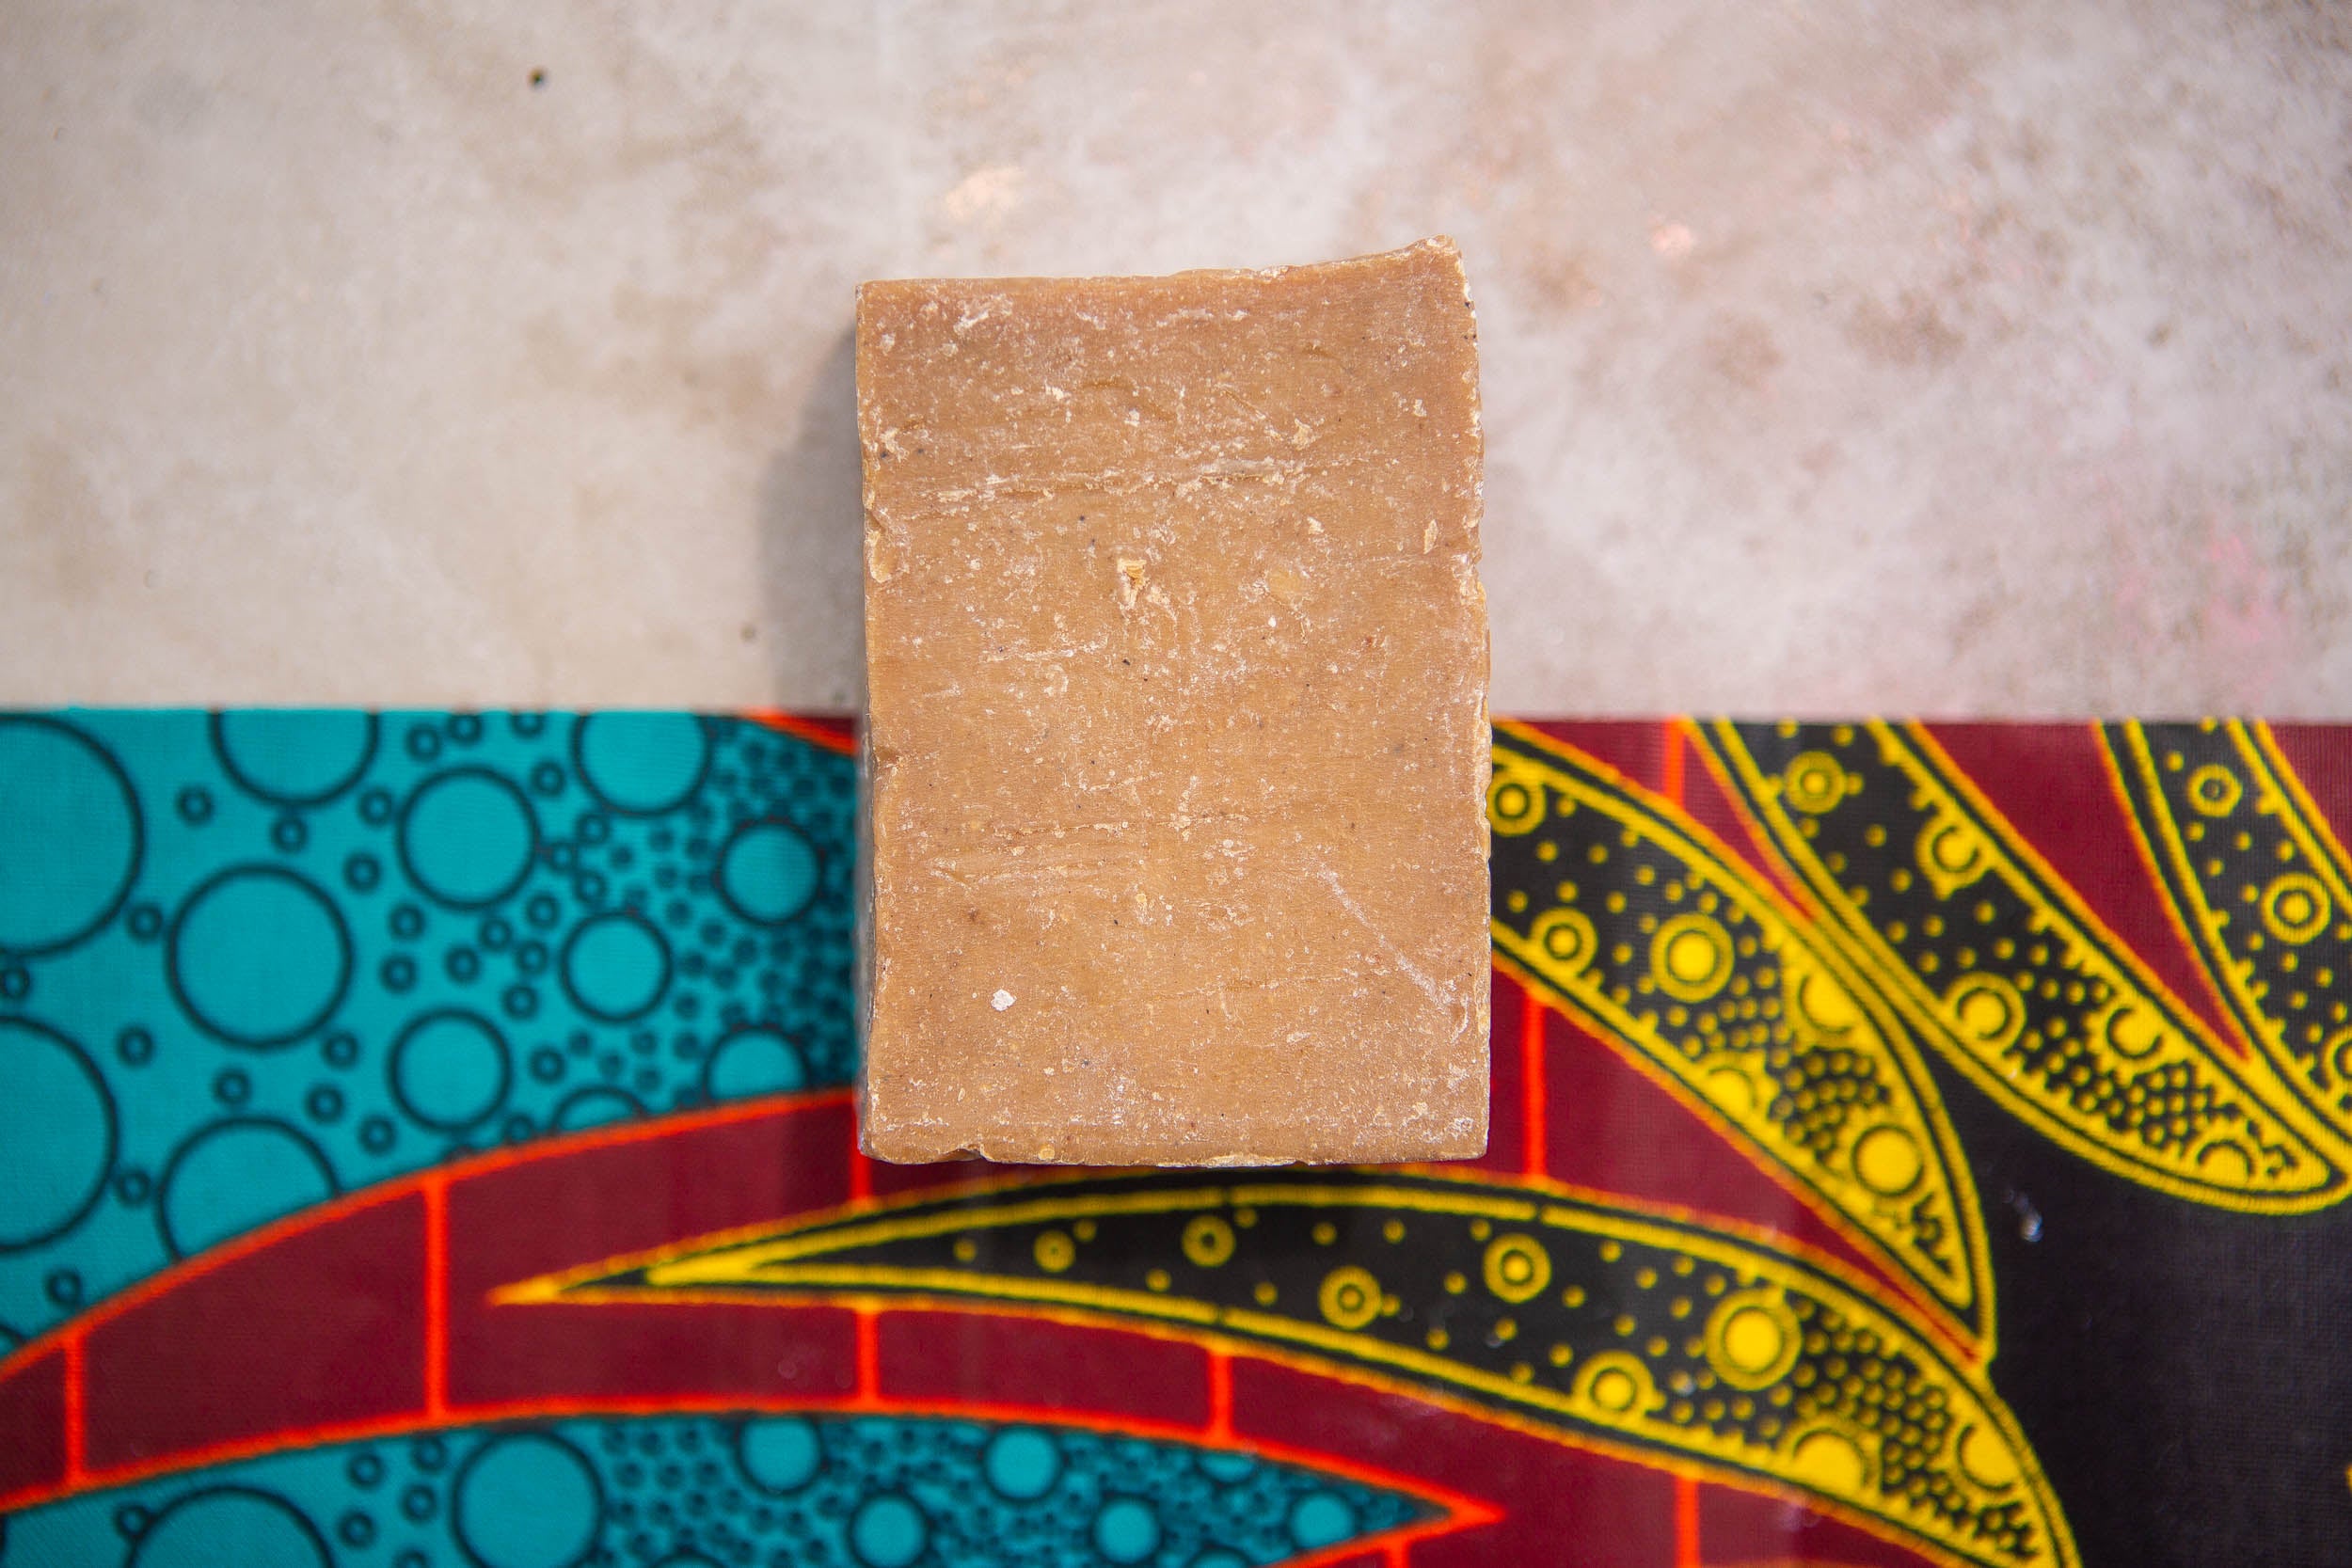 Zambeezi hand made, Fair Trade, beeswax soap crafted from ethically sourced, sustainable palm kernel oil